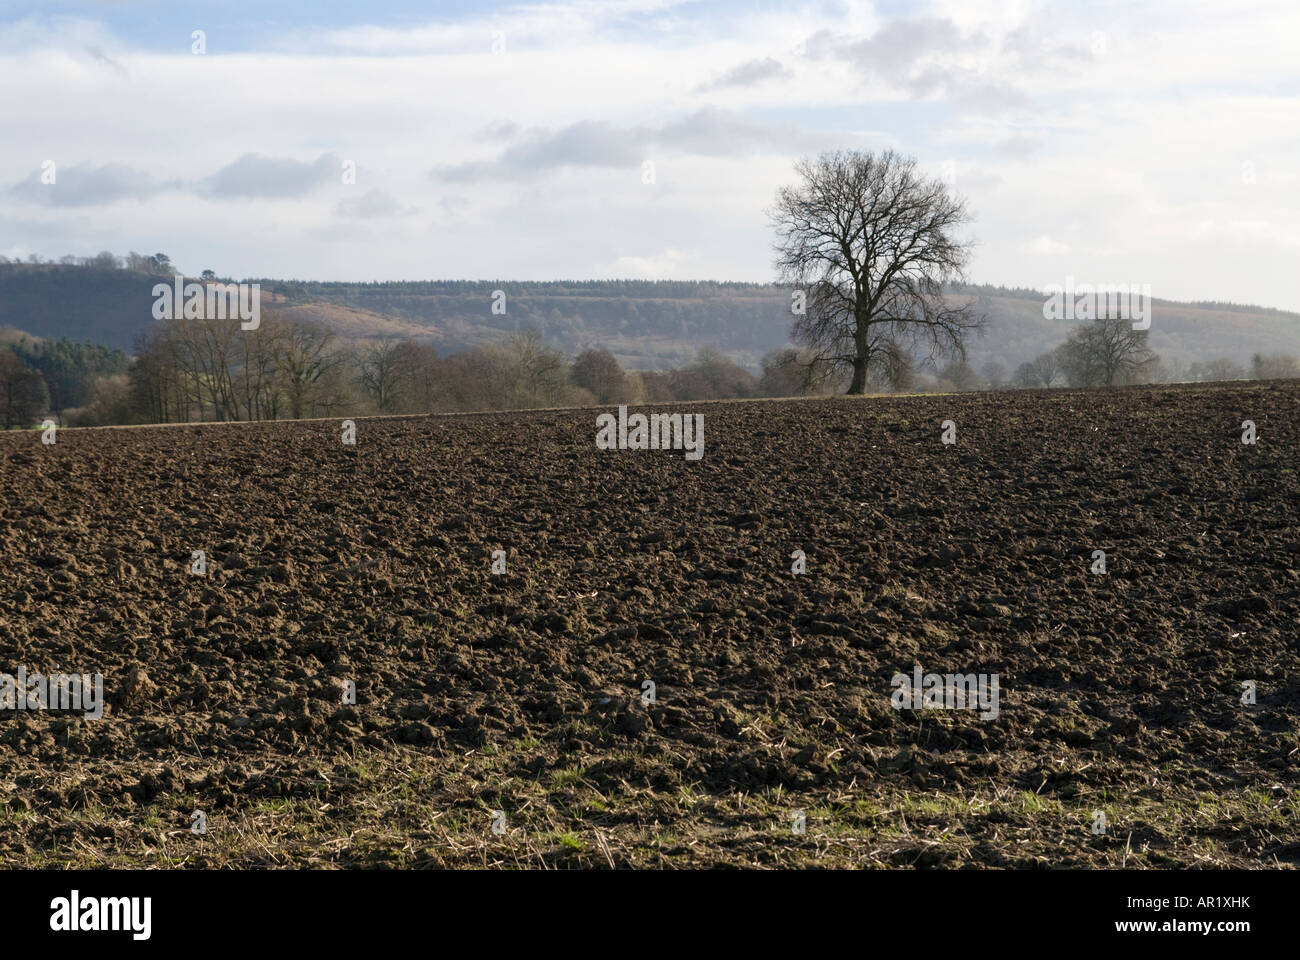 A ploughed field in Shropshire, UK Stock Photo